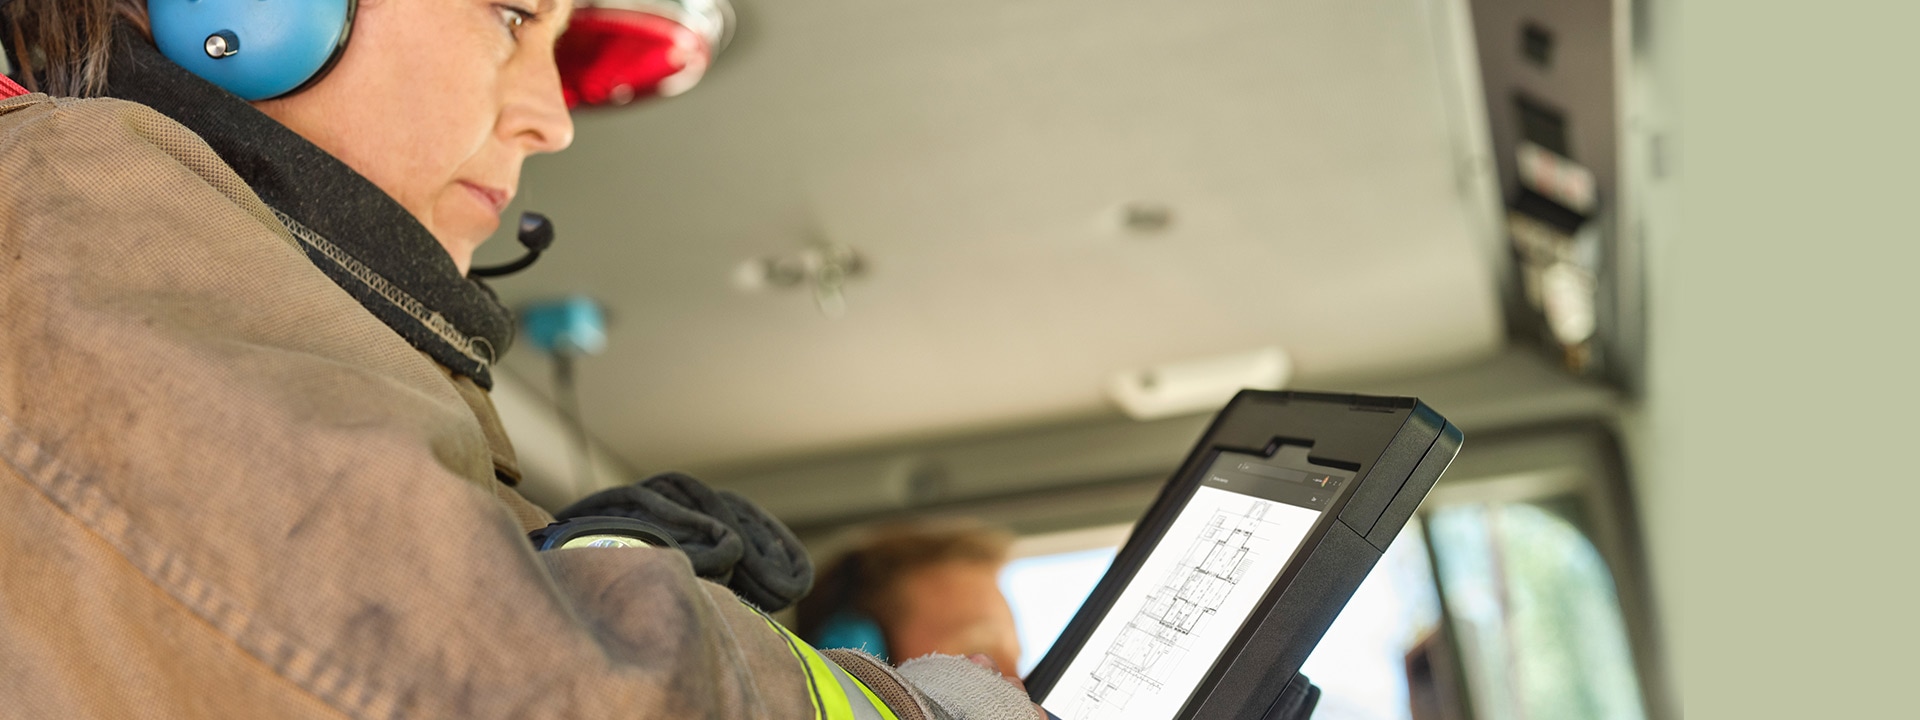 A woman dressed in bunker gear is observed looking at the screen of her Surface device while seated in a fire truck